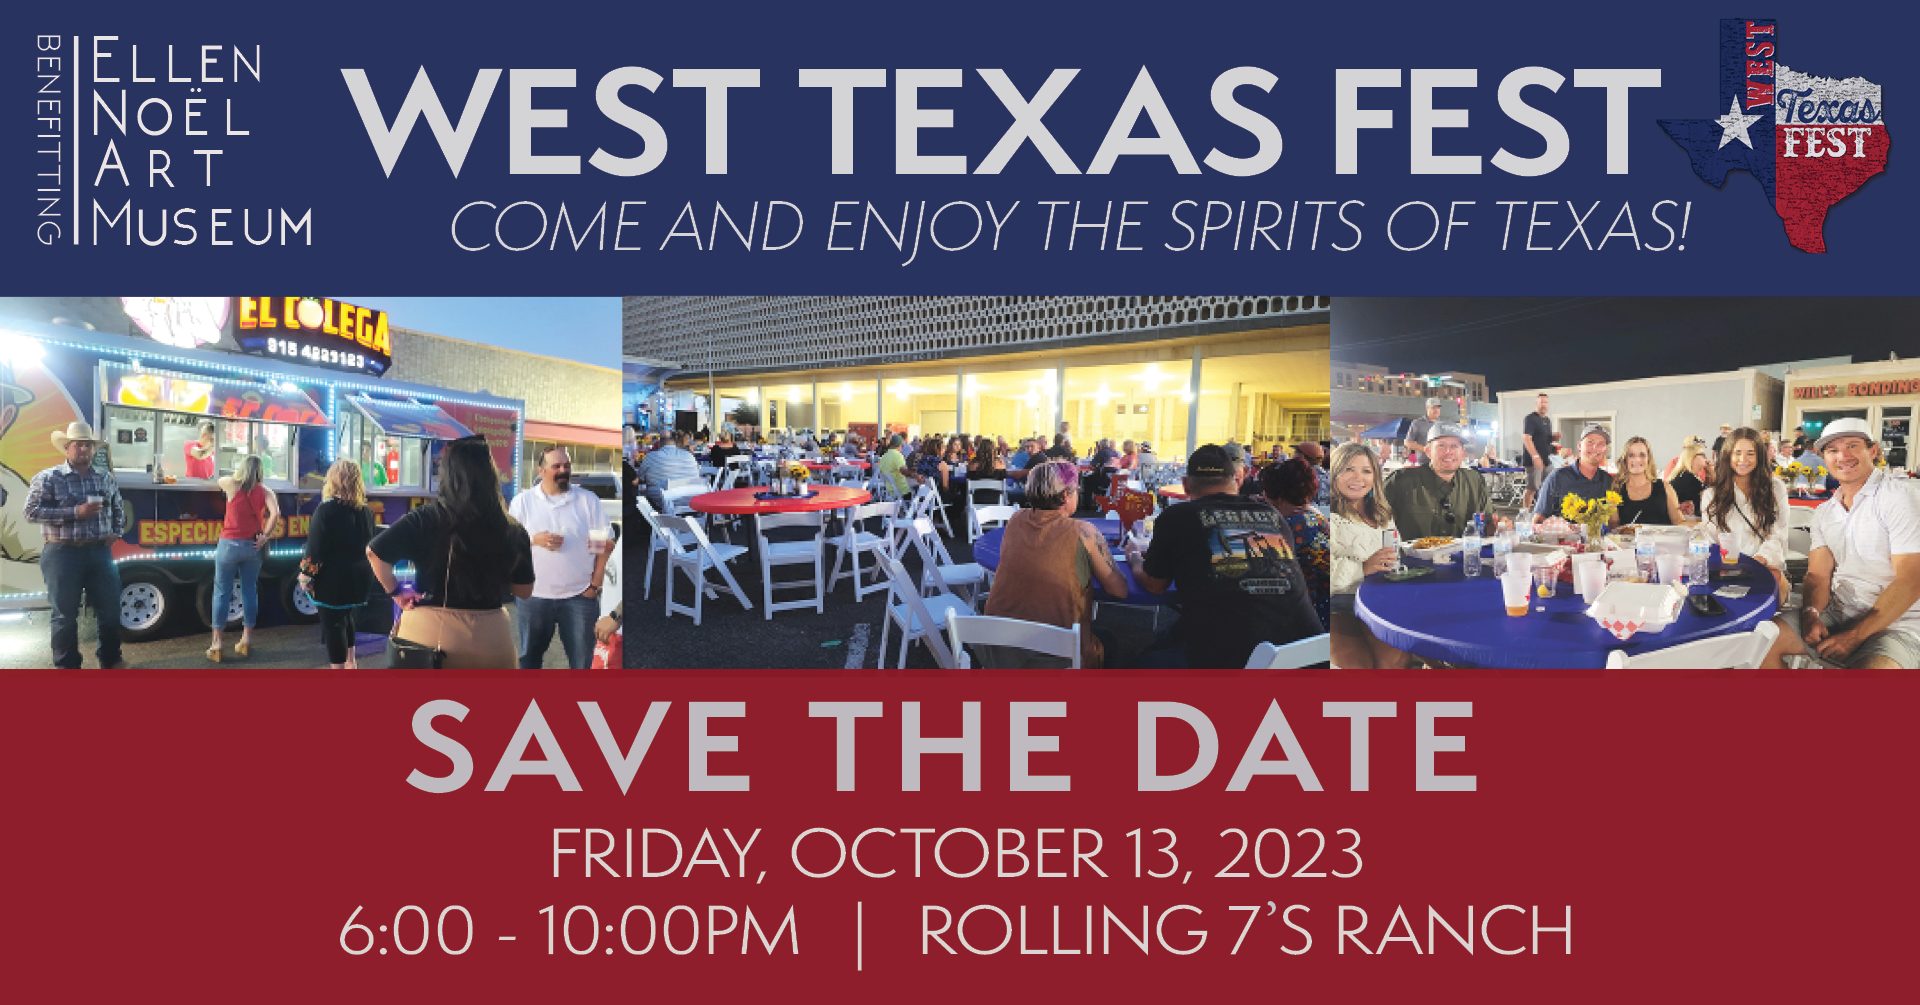 West Texas Fest 2023 takes place on October 13, 2023 in Odessa, TX